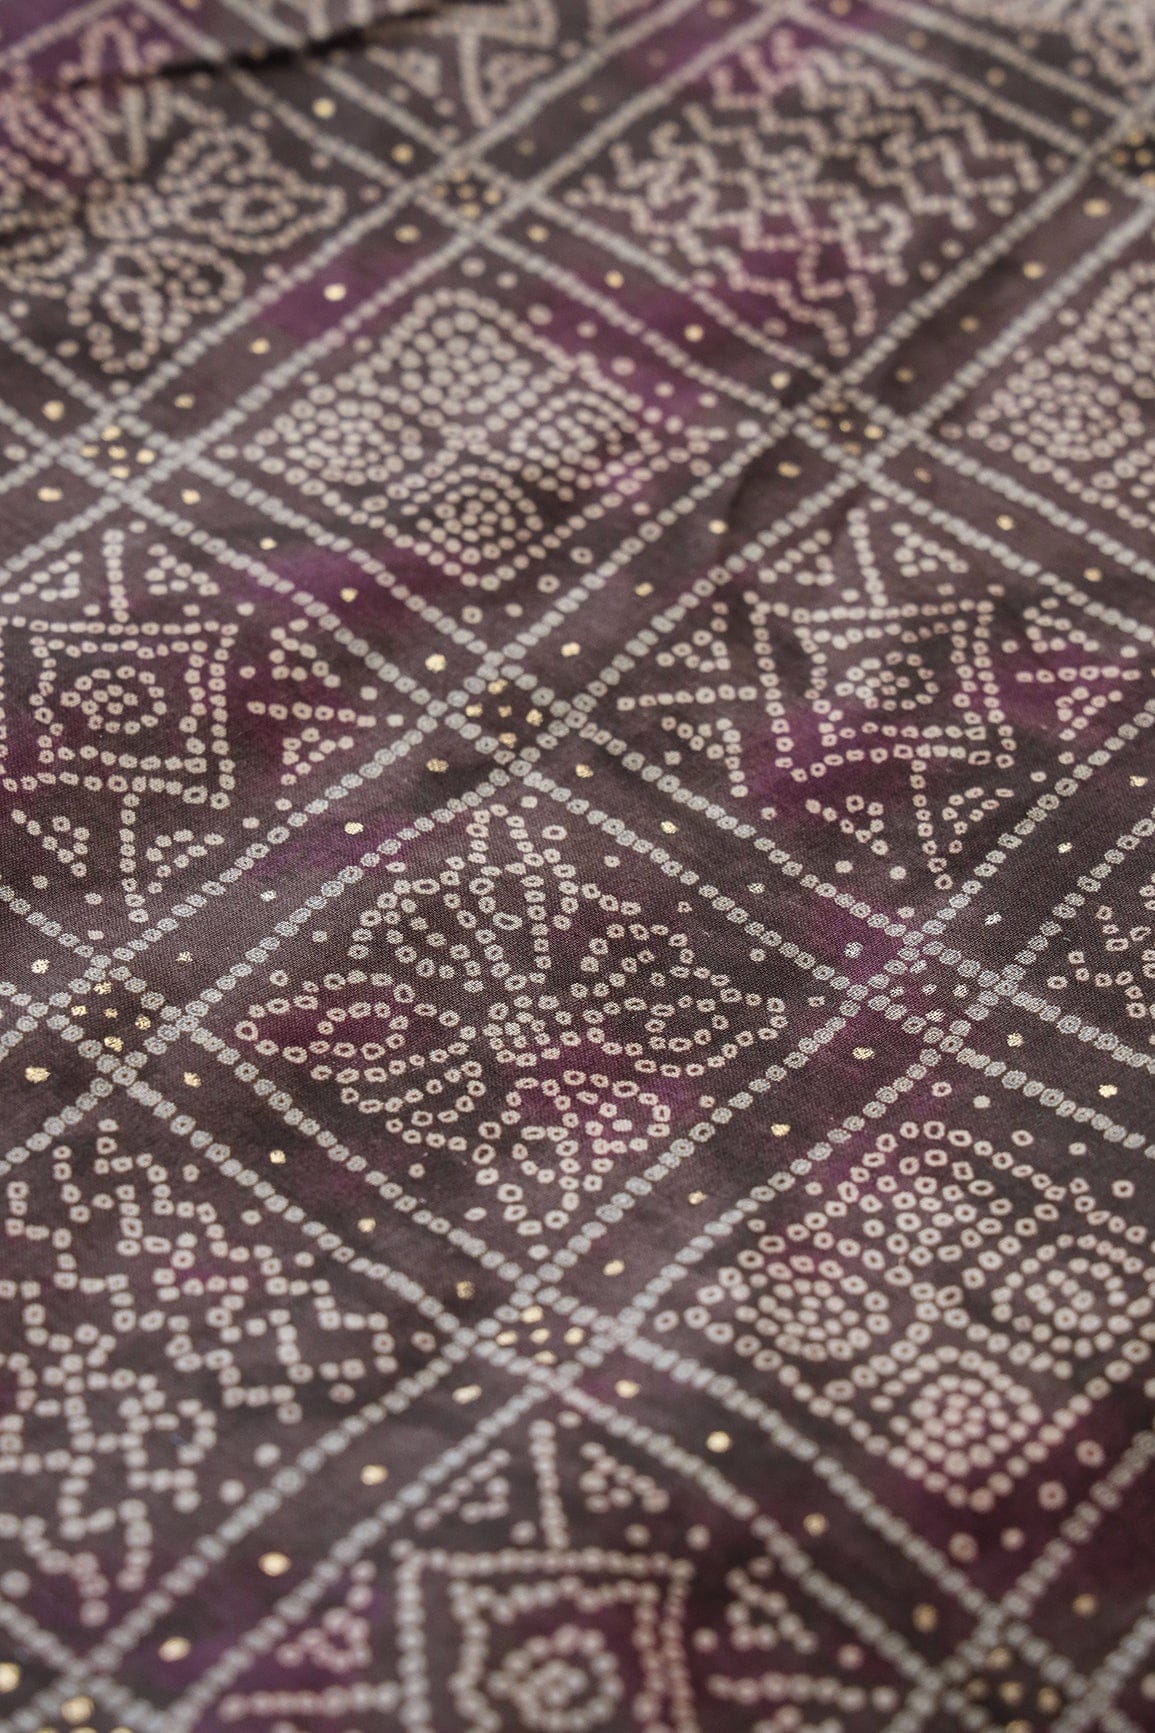 doeraa Prints Dark Brown And Beige Bandhani Pattern With Foil Print On Pure Mul Cotton Fabric